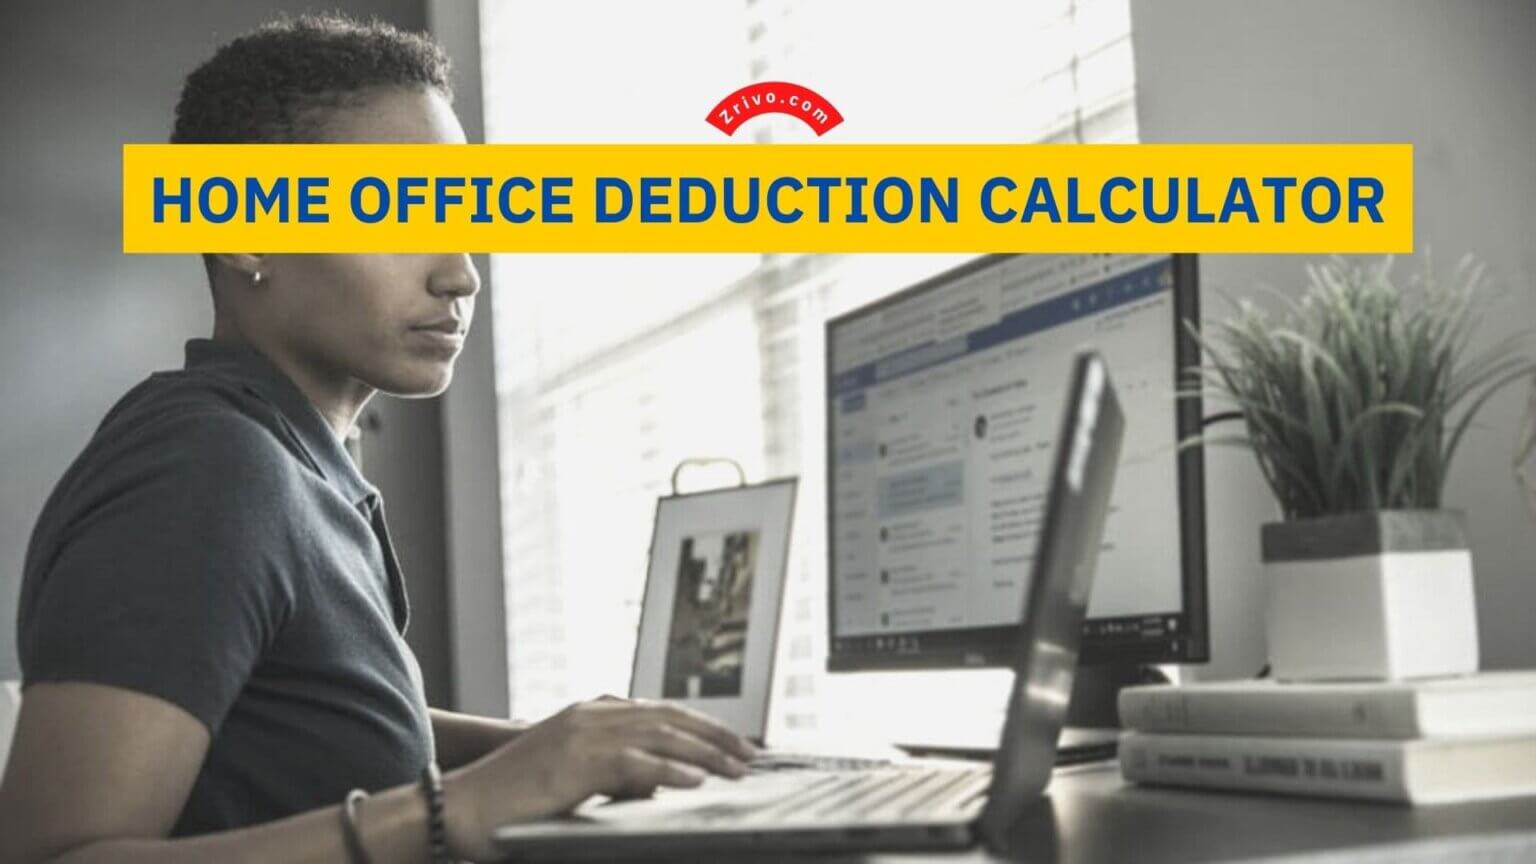 Home Office Deduction Calculator Zrivo Cover 1 1536x864 